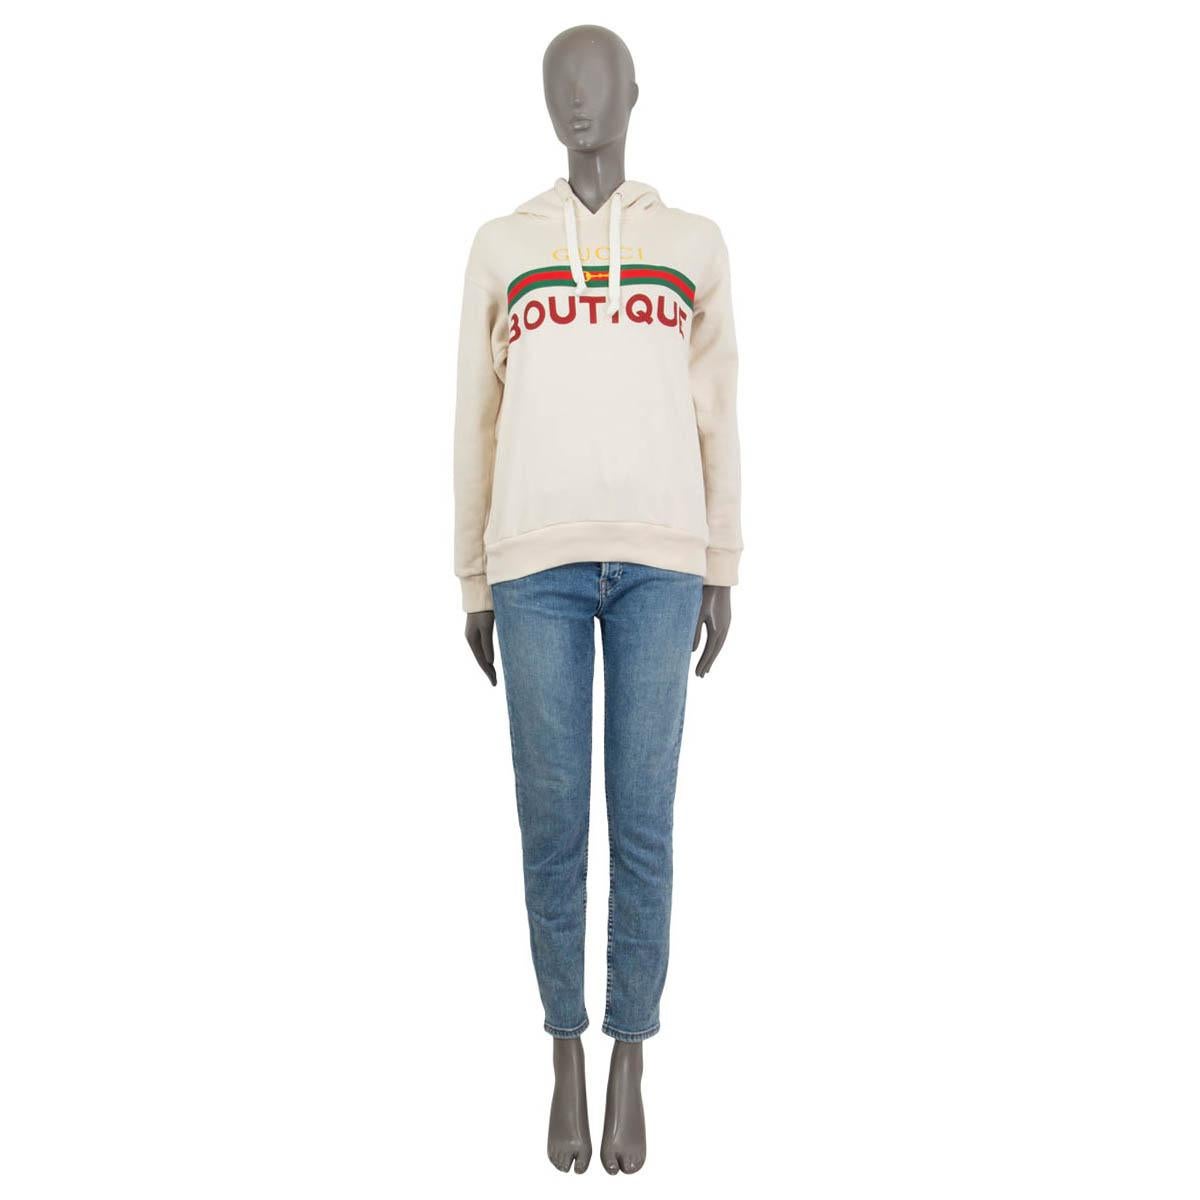 100% authentic Gucci hooded 'Boutique' sweater in cream cotton, red, green and yellow cotton (100%). Spring/summer 2020. Features long sleeves and an oversized fit. Unlined. Has been worn once and is in virtually new condition.

Measurements
Tag